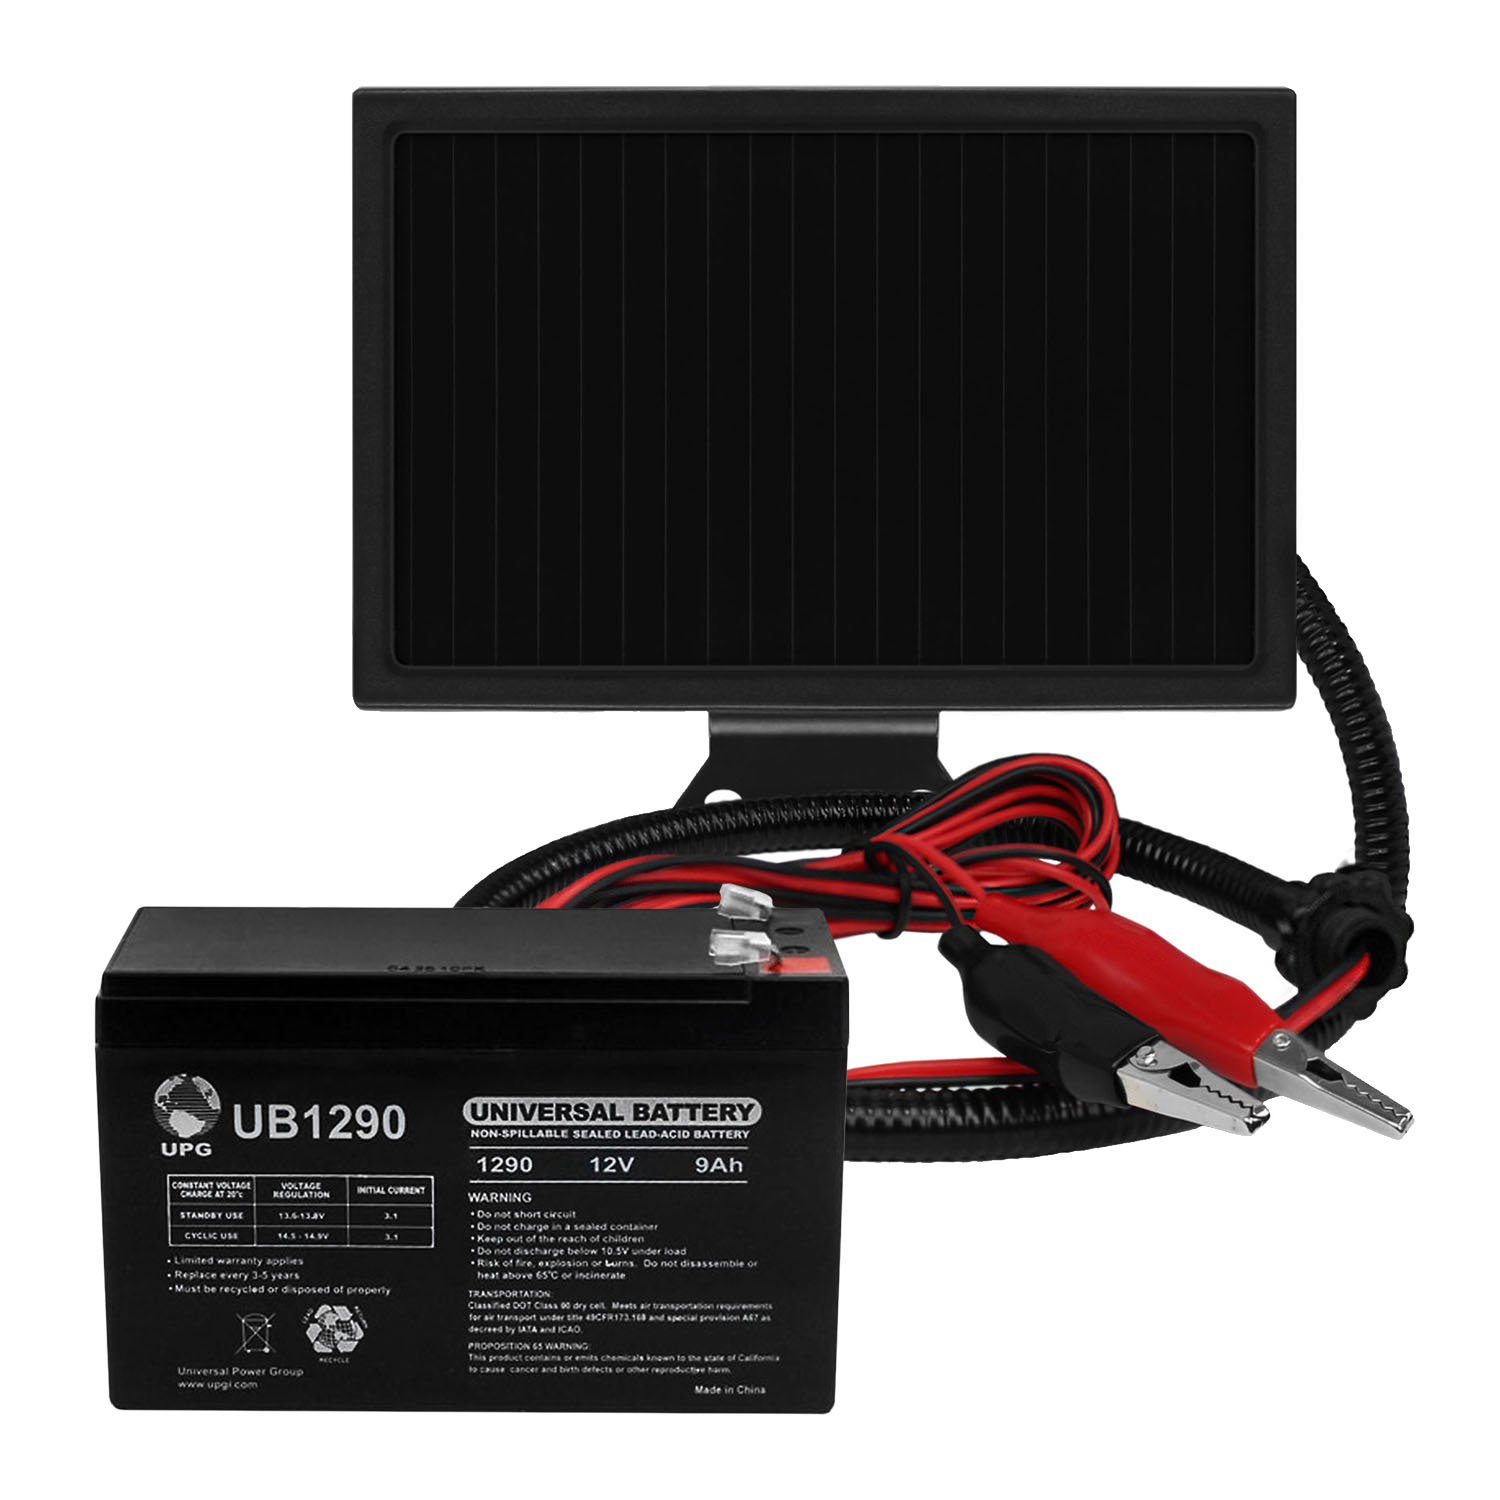 UB1290 12V 9AH Replacement for Vision CP1290L + 12V Solar Panel Charger